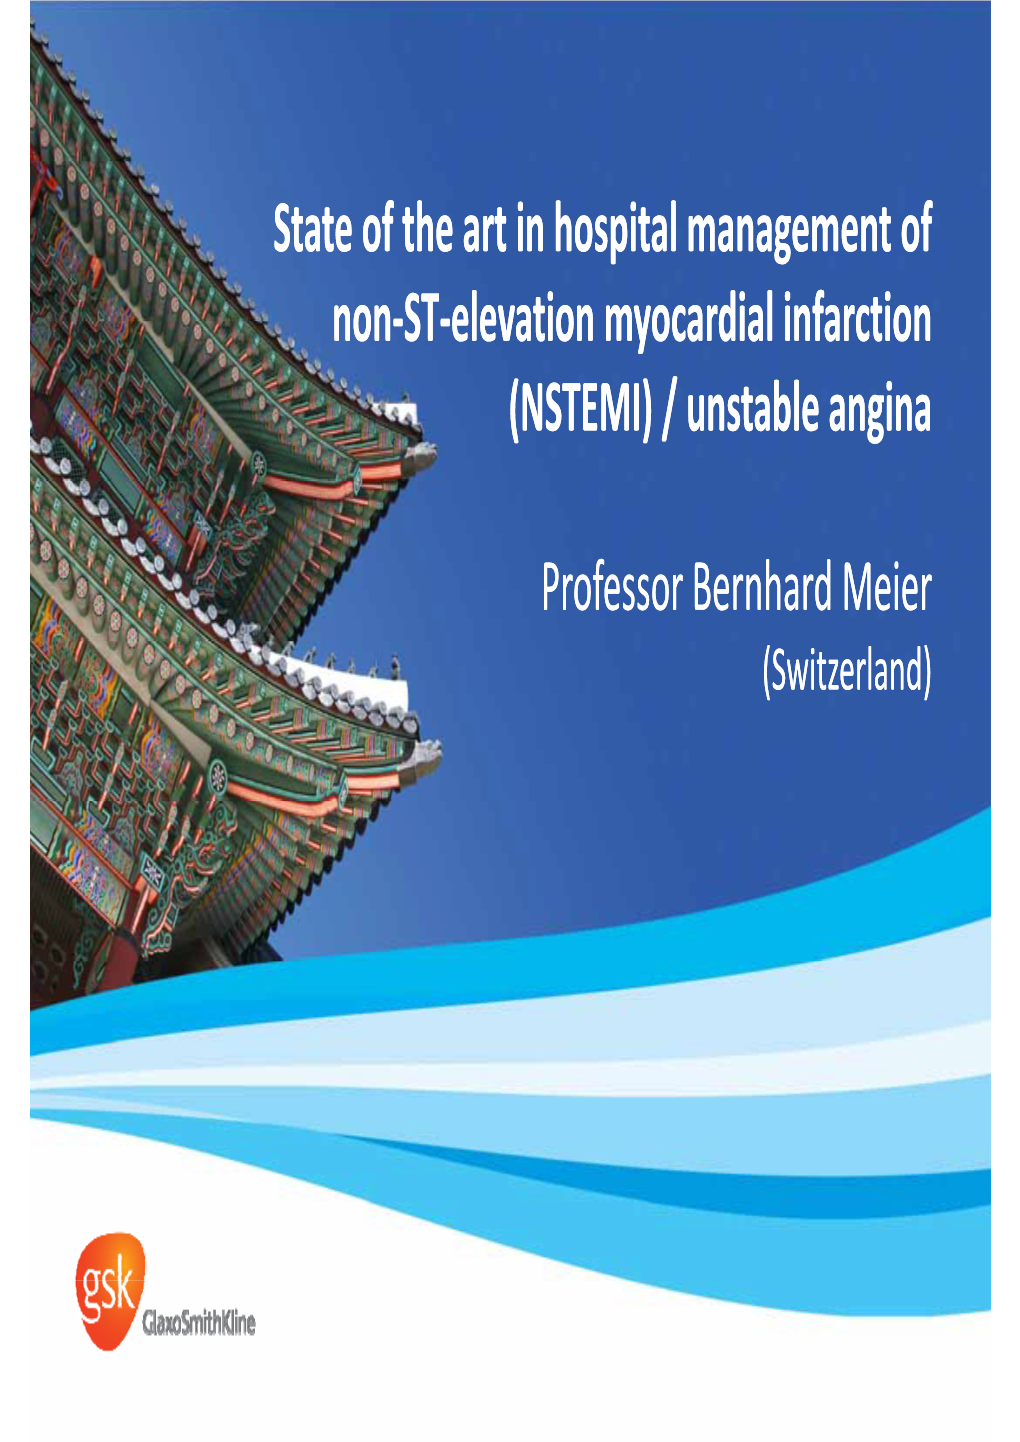 State of the Art in Hospital Management of Non-ST-Elevation